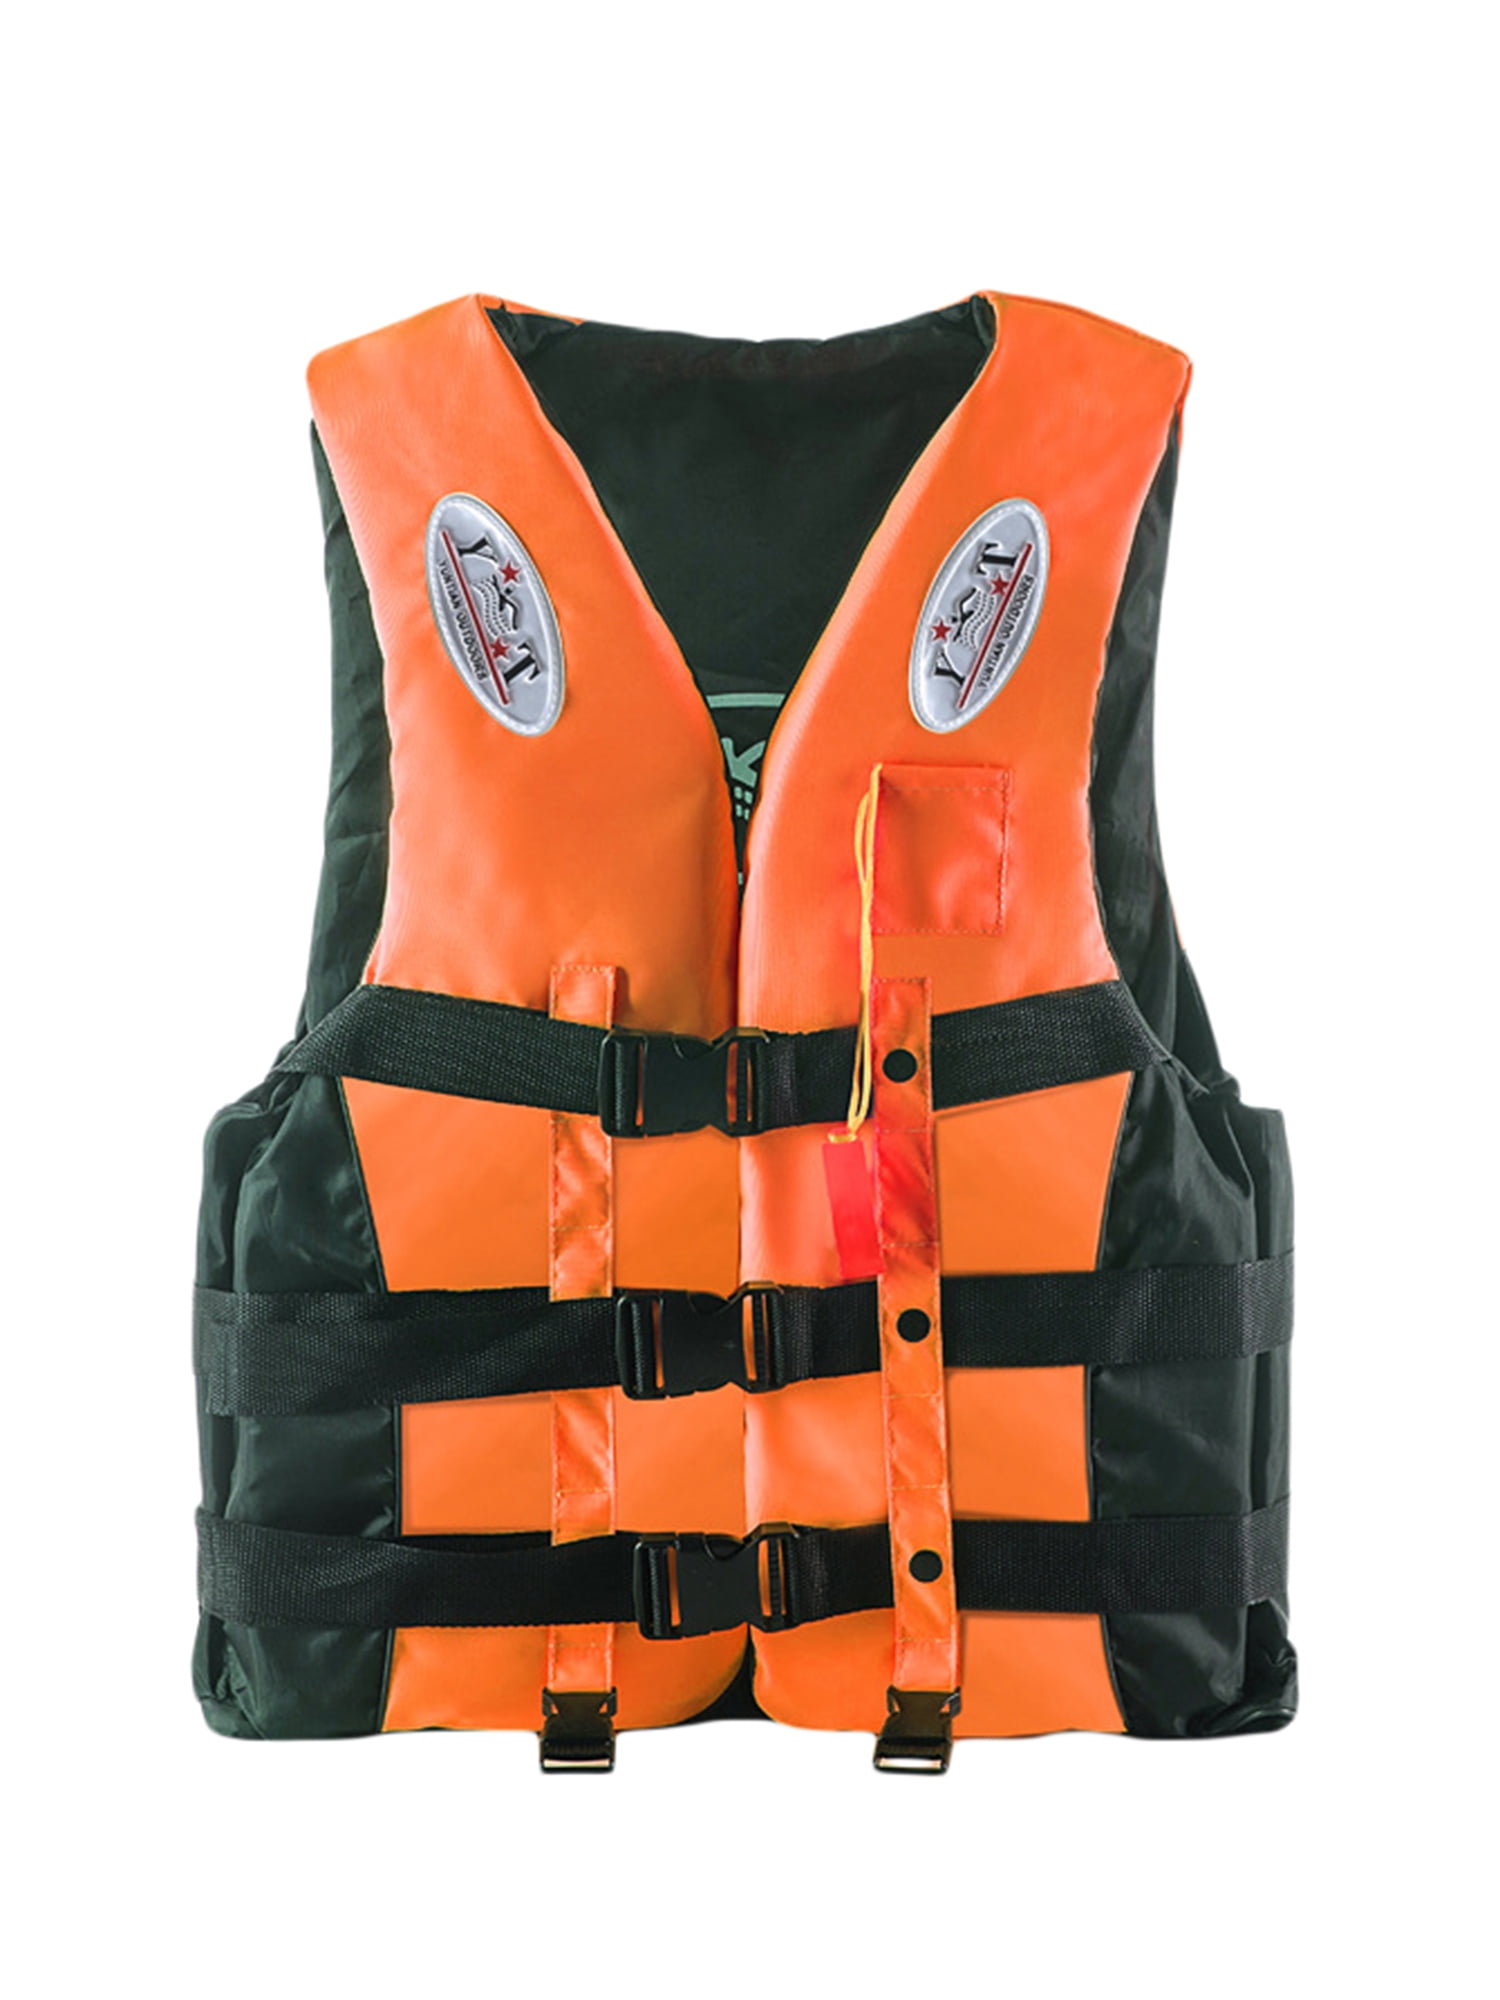 Inflatable Life Jacket Adult Water Sports Swimming Fishing Safety Life Vest US 